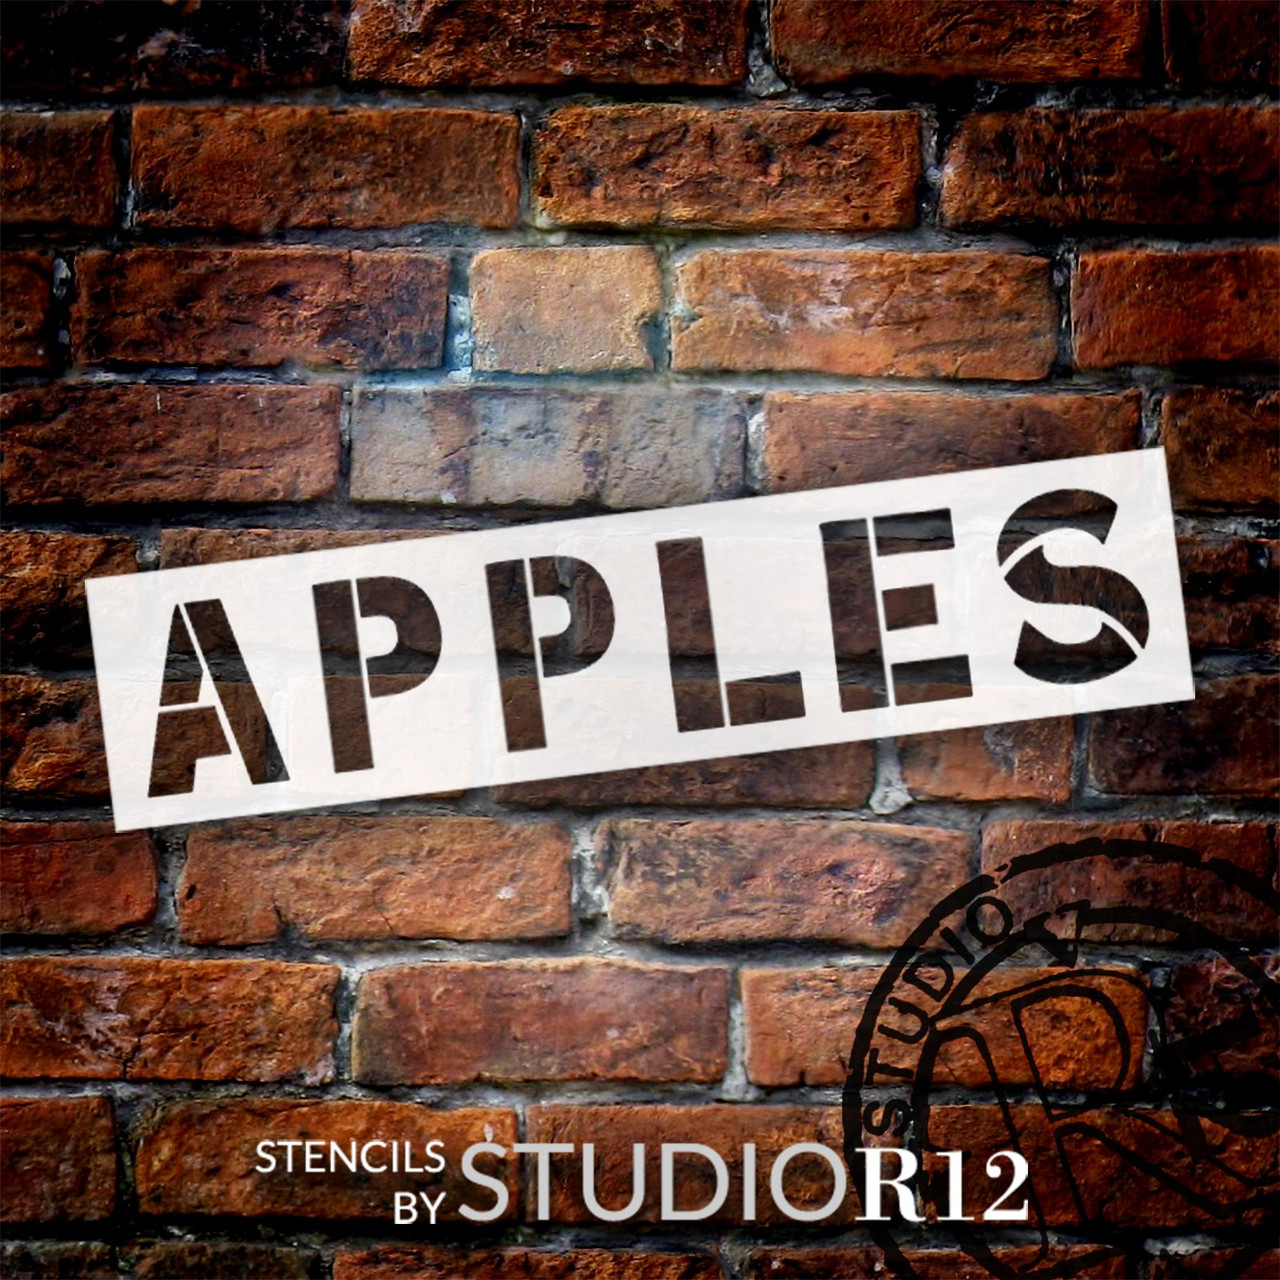 Apples Word Art Stencil by StudioR12 - Select Size - USA Made - Craft DIY Modern Farmhouse Kitchen Fall Decor | Paint Rustic Oversize Pantry Wood Sign